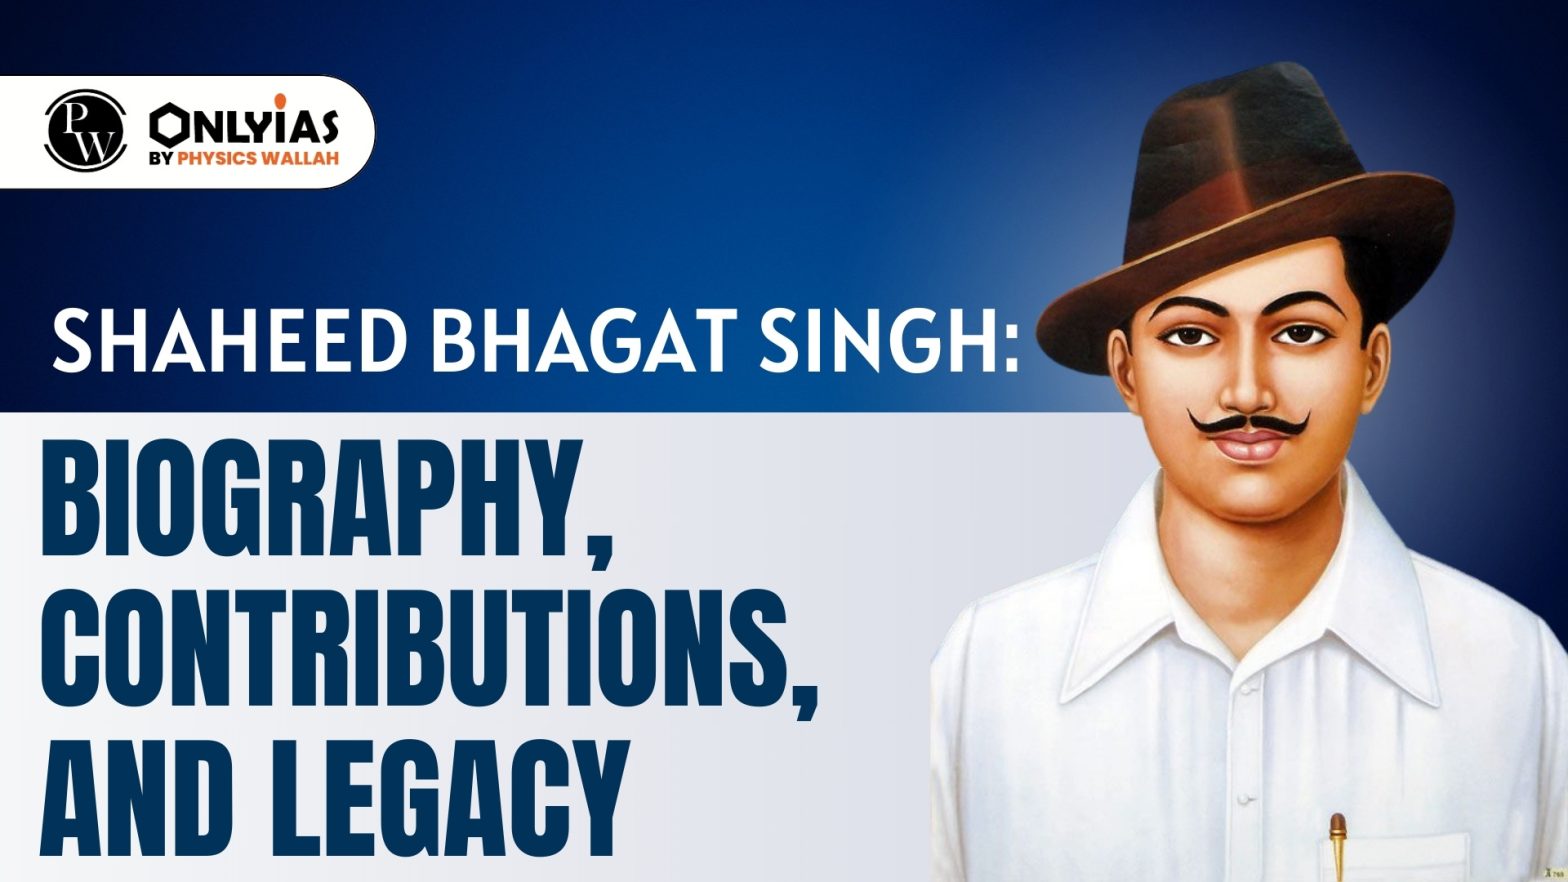 Shaheed Bhagat Singh: Biography, Contributions, And Legacy - PWOnlyIAS